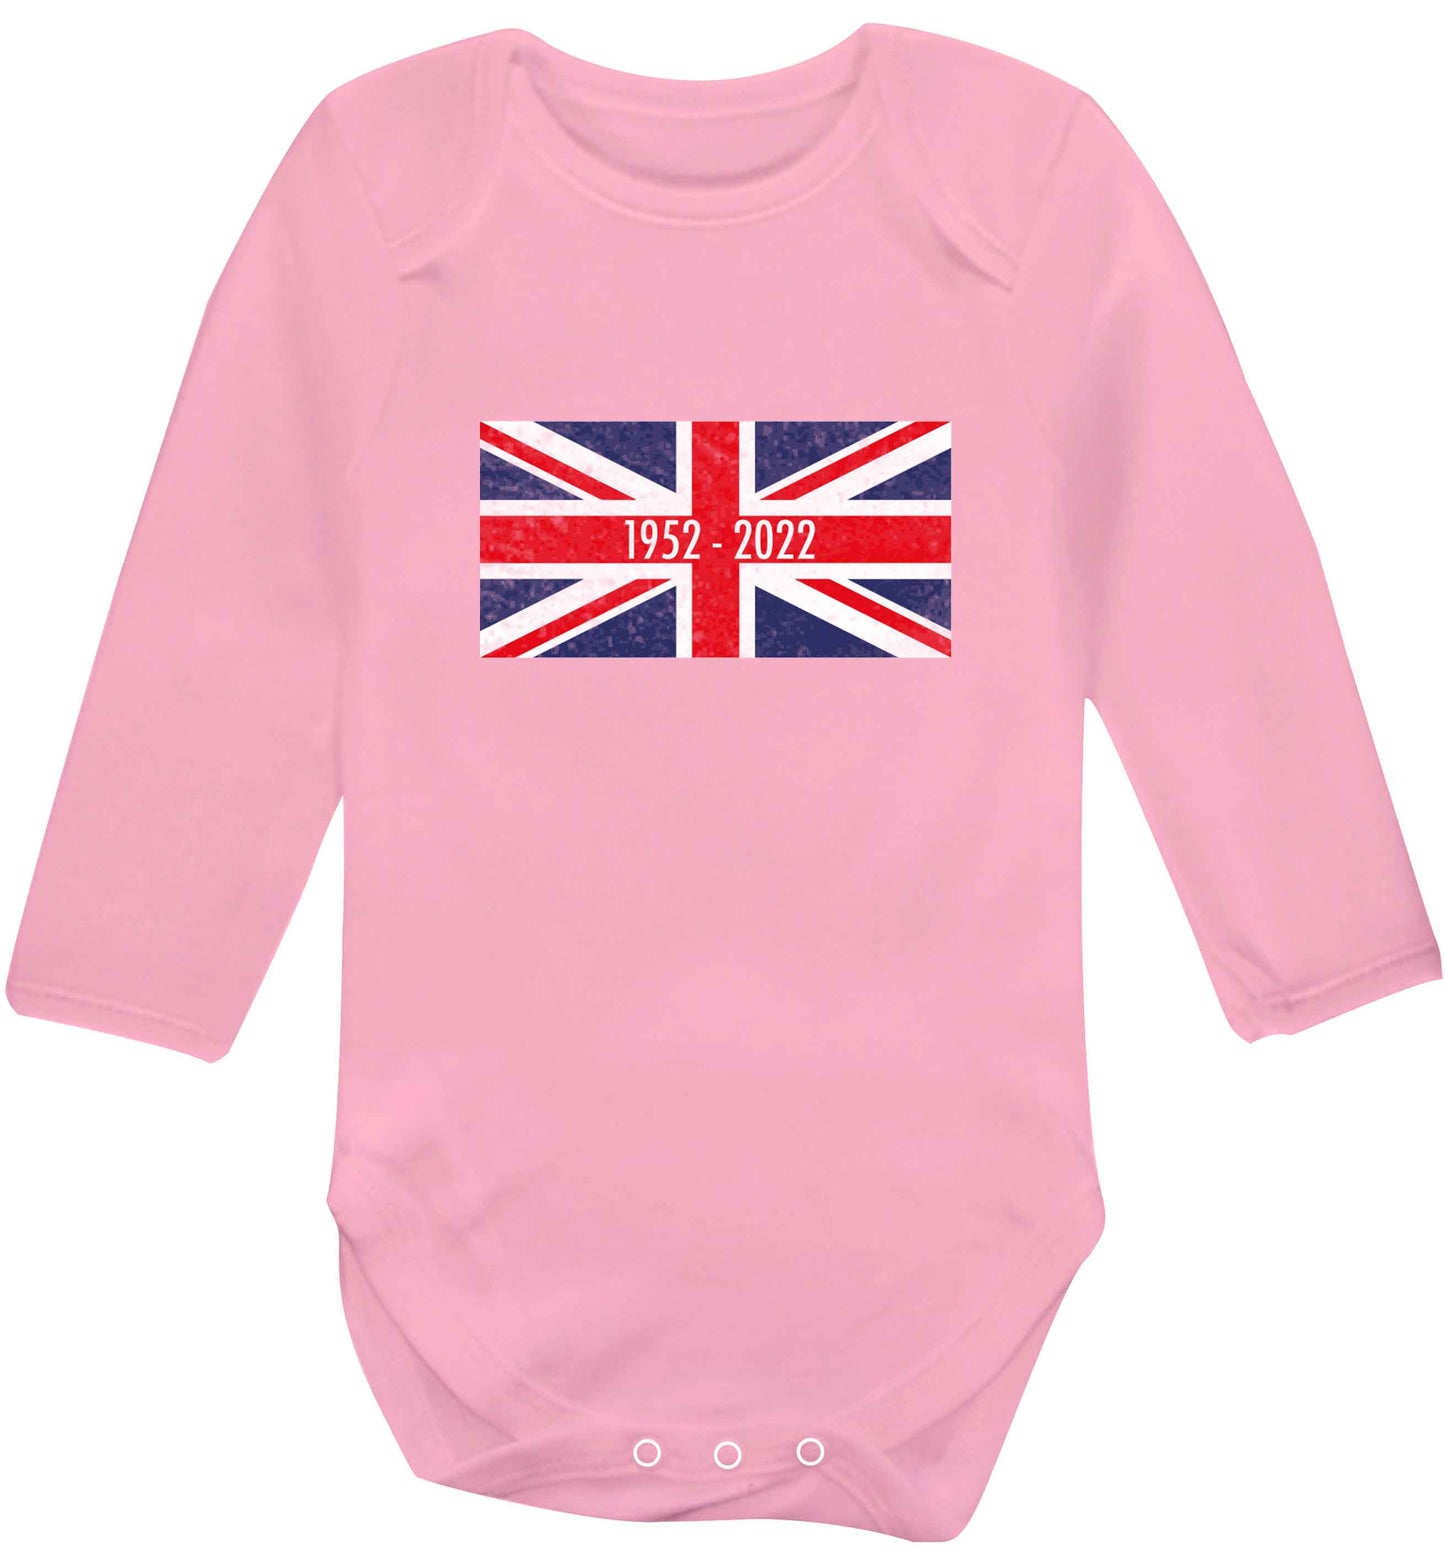 British flag Queens jubilee baby vest long sleeved pale pink 6-12 months